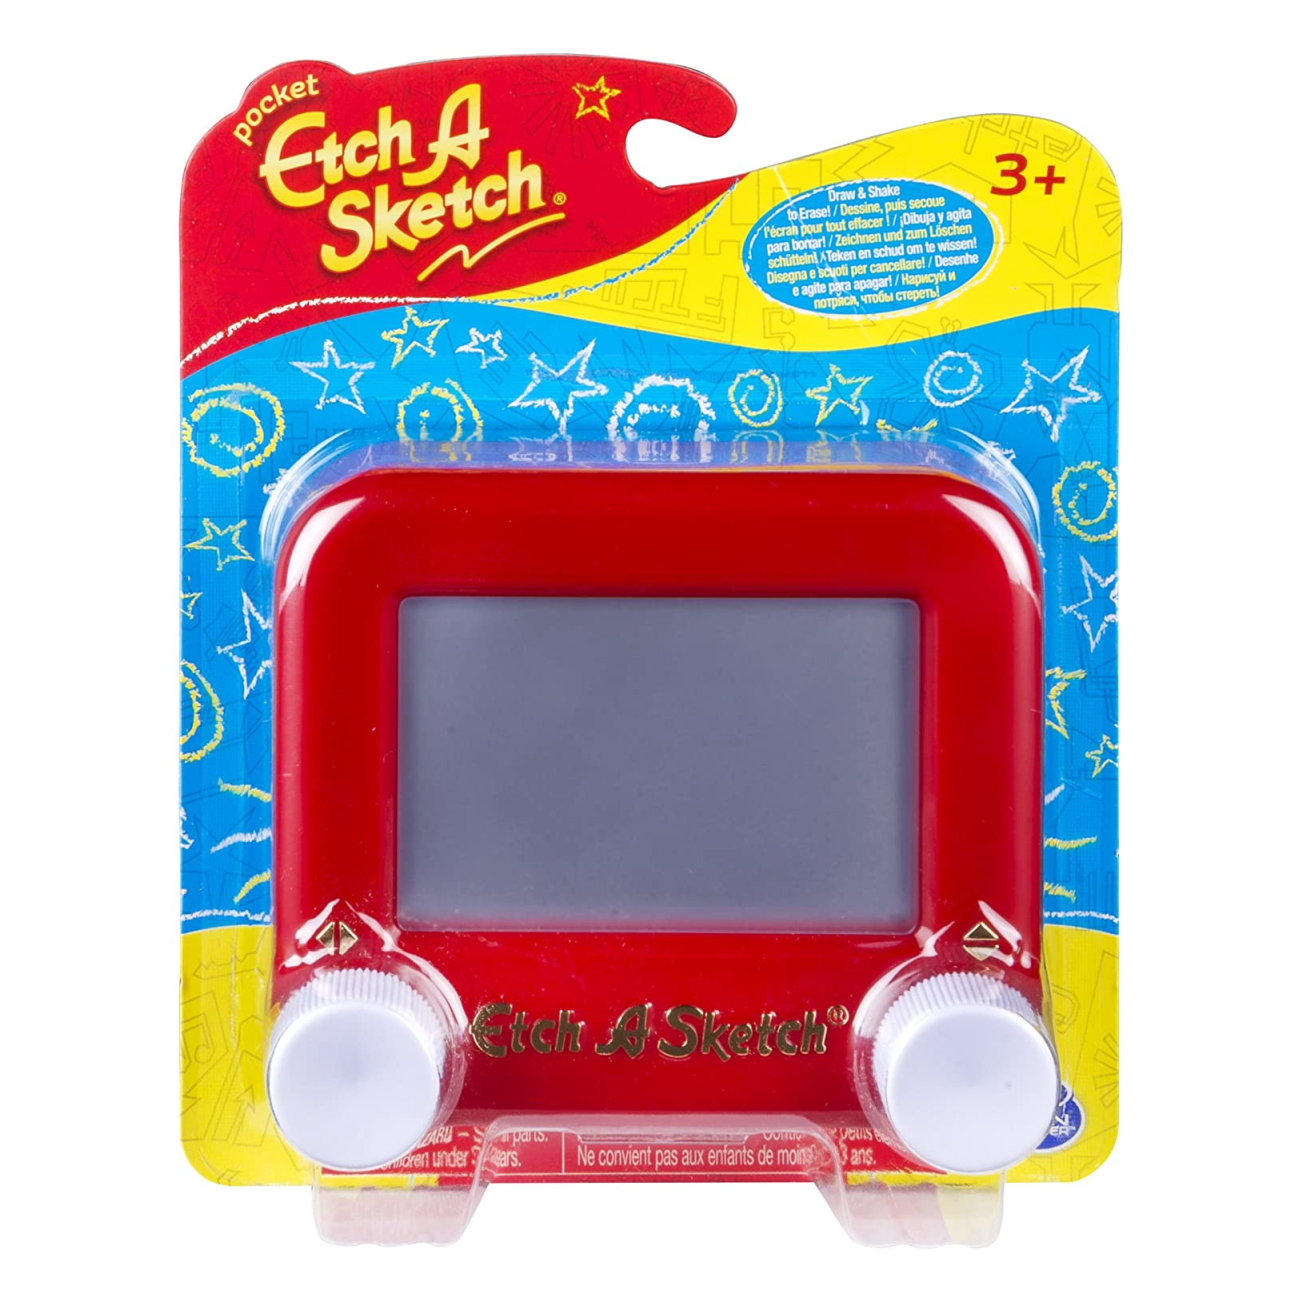 Introduction to Crafts: Learn to Etch-A-Sketch with @cadetspace